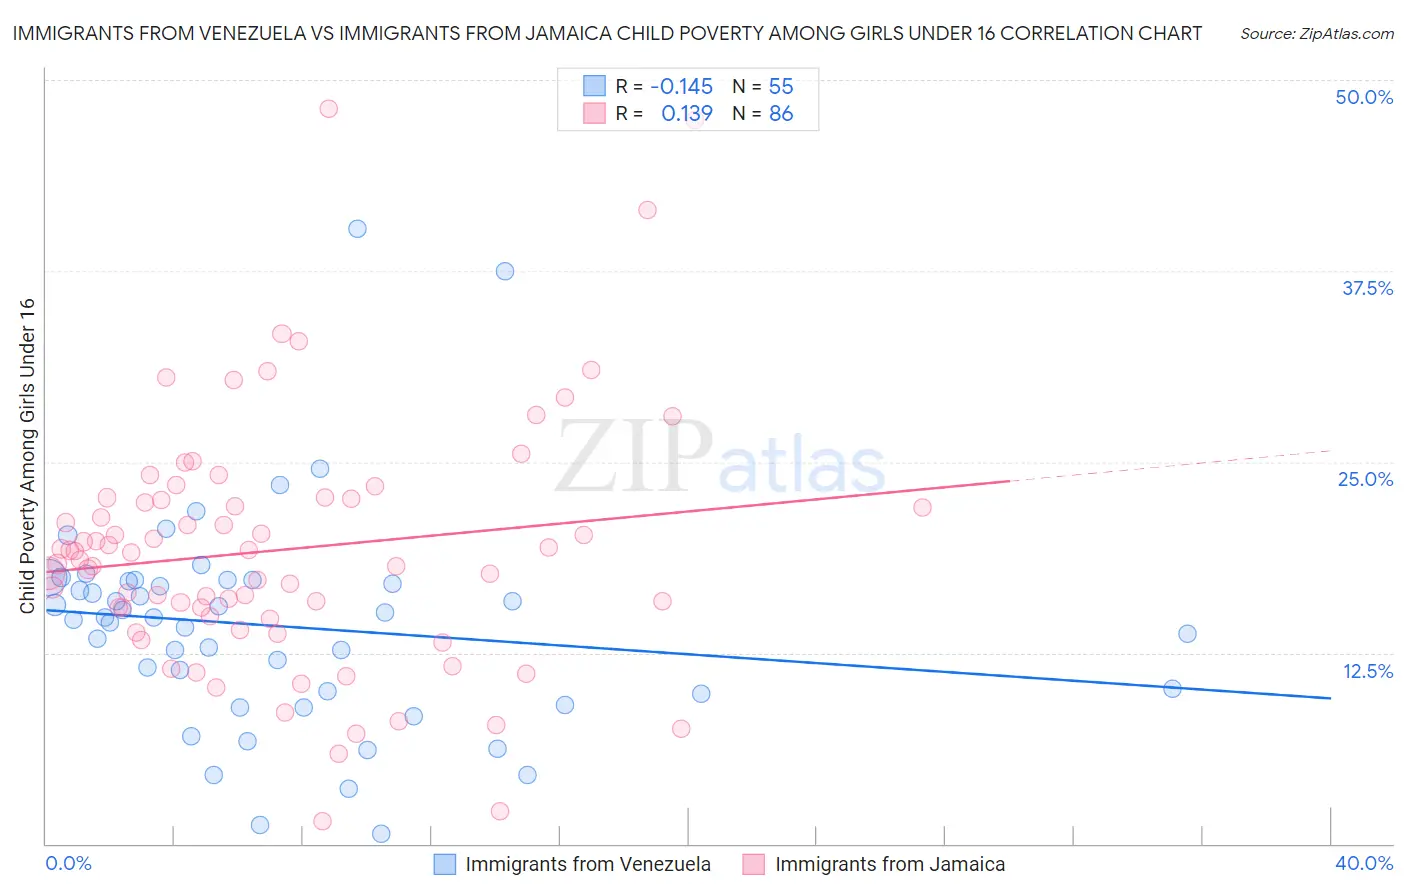 Immigrants from Venezuela vs Immigrants from Jamaica Child Poverty Among Girls Under 16